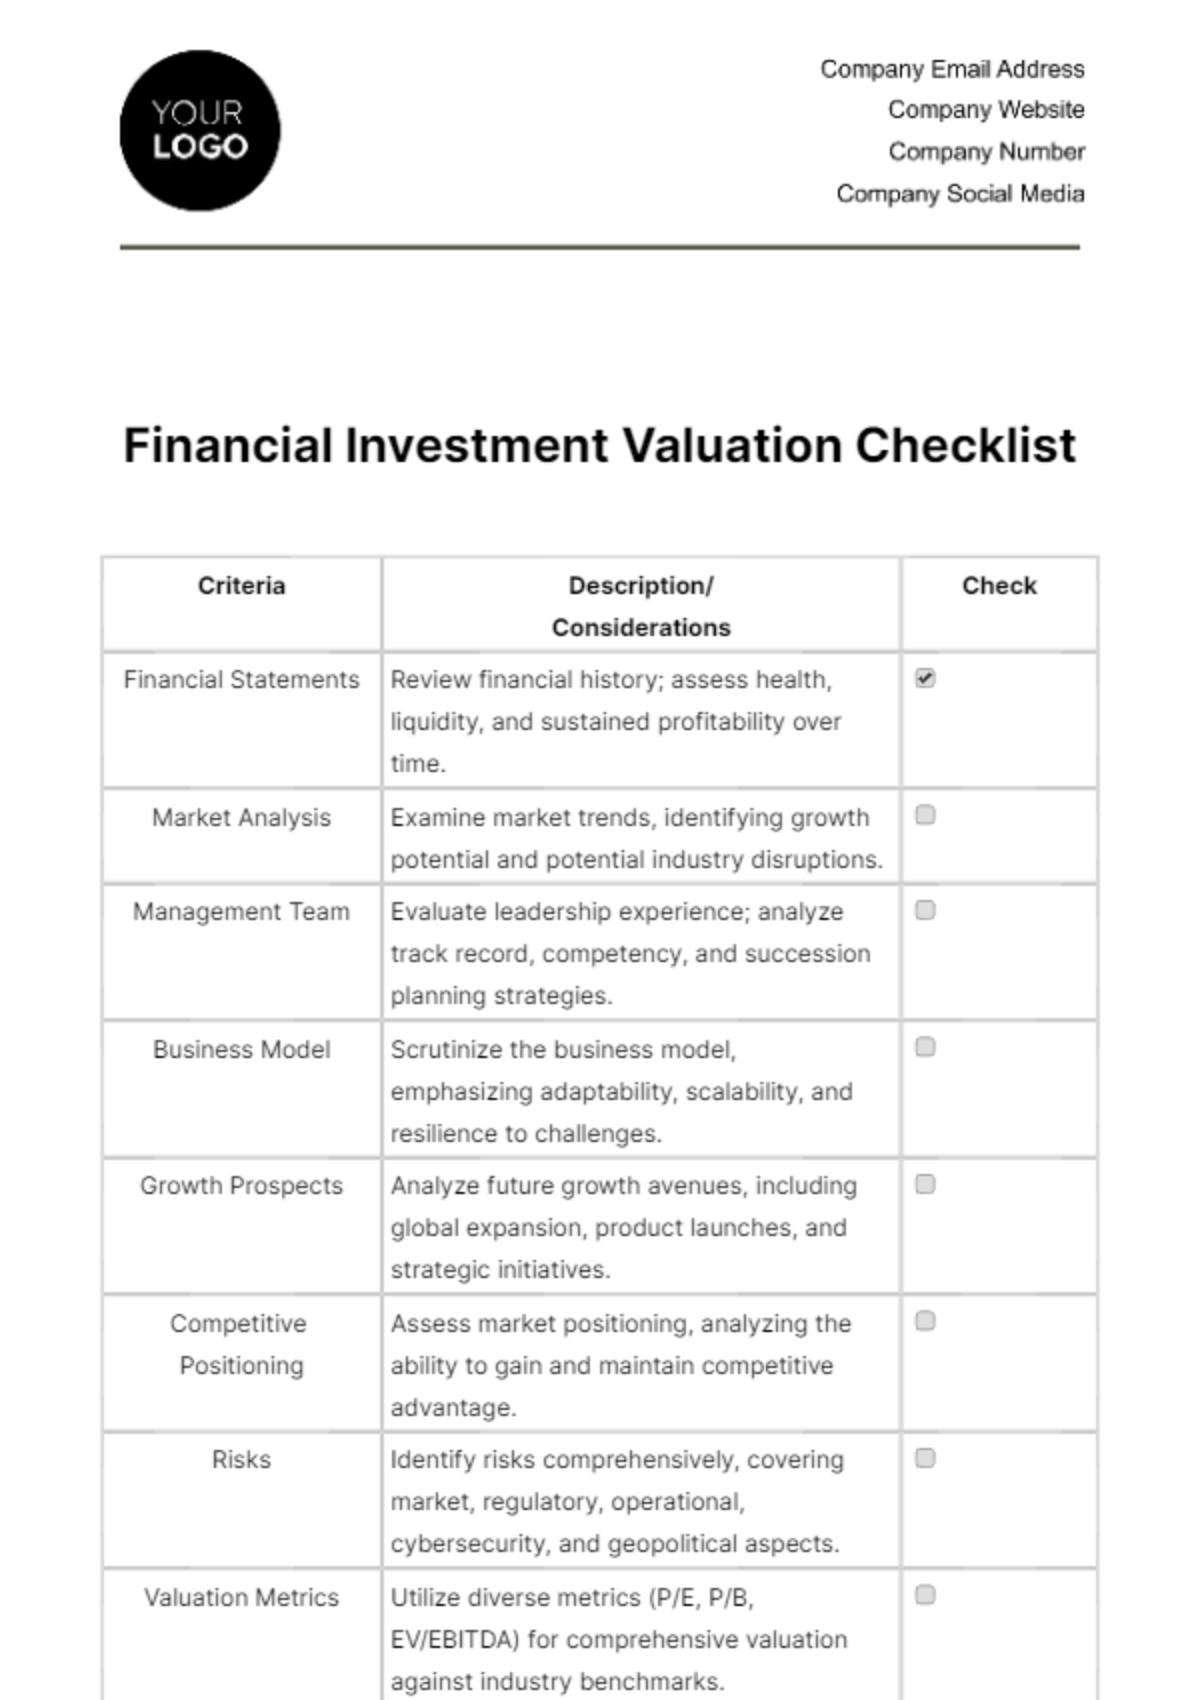 Financial Investment Valuation Checklist Template